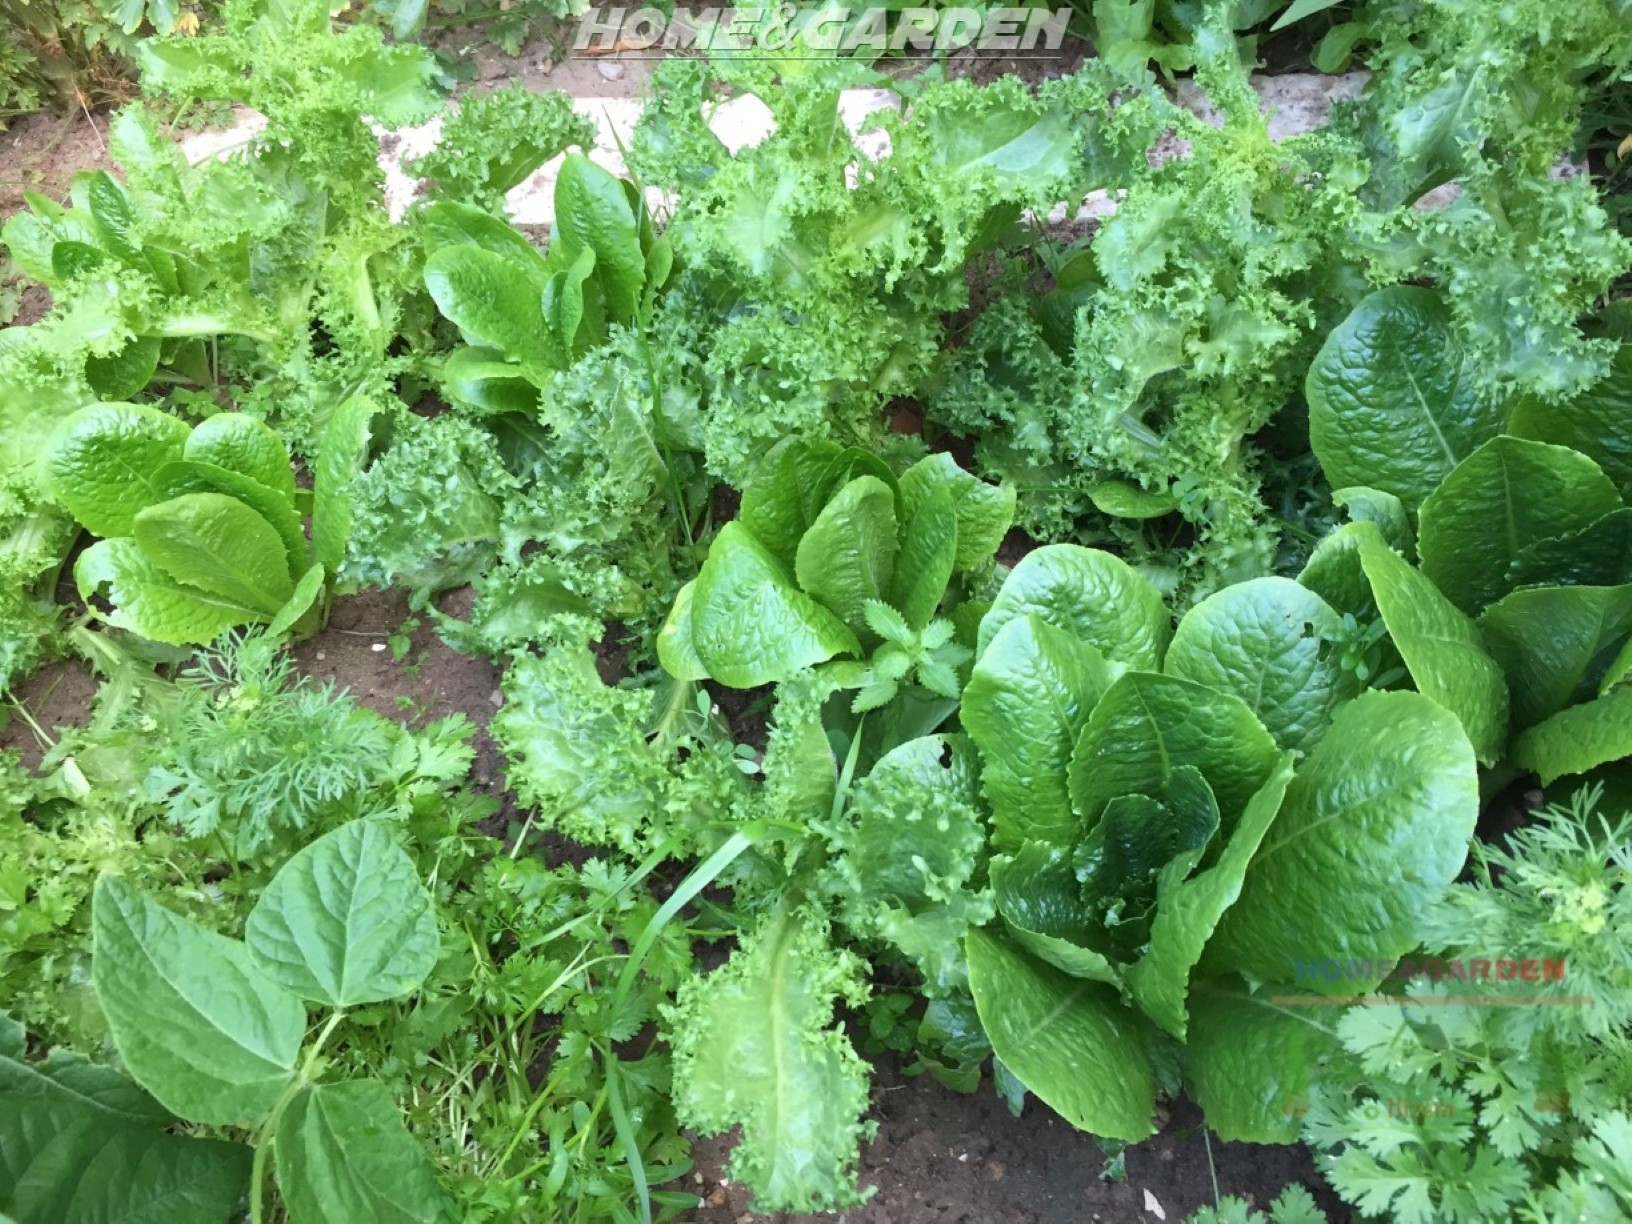 Lettuces are easy to grow and thrive in the cool temperatures of fall. You can sow lettuce late summer for a fall crop. Be sure to grow fast maturing varieties.